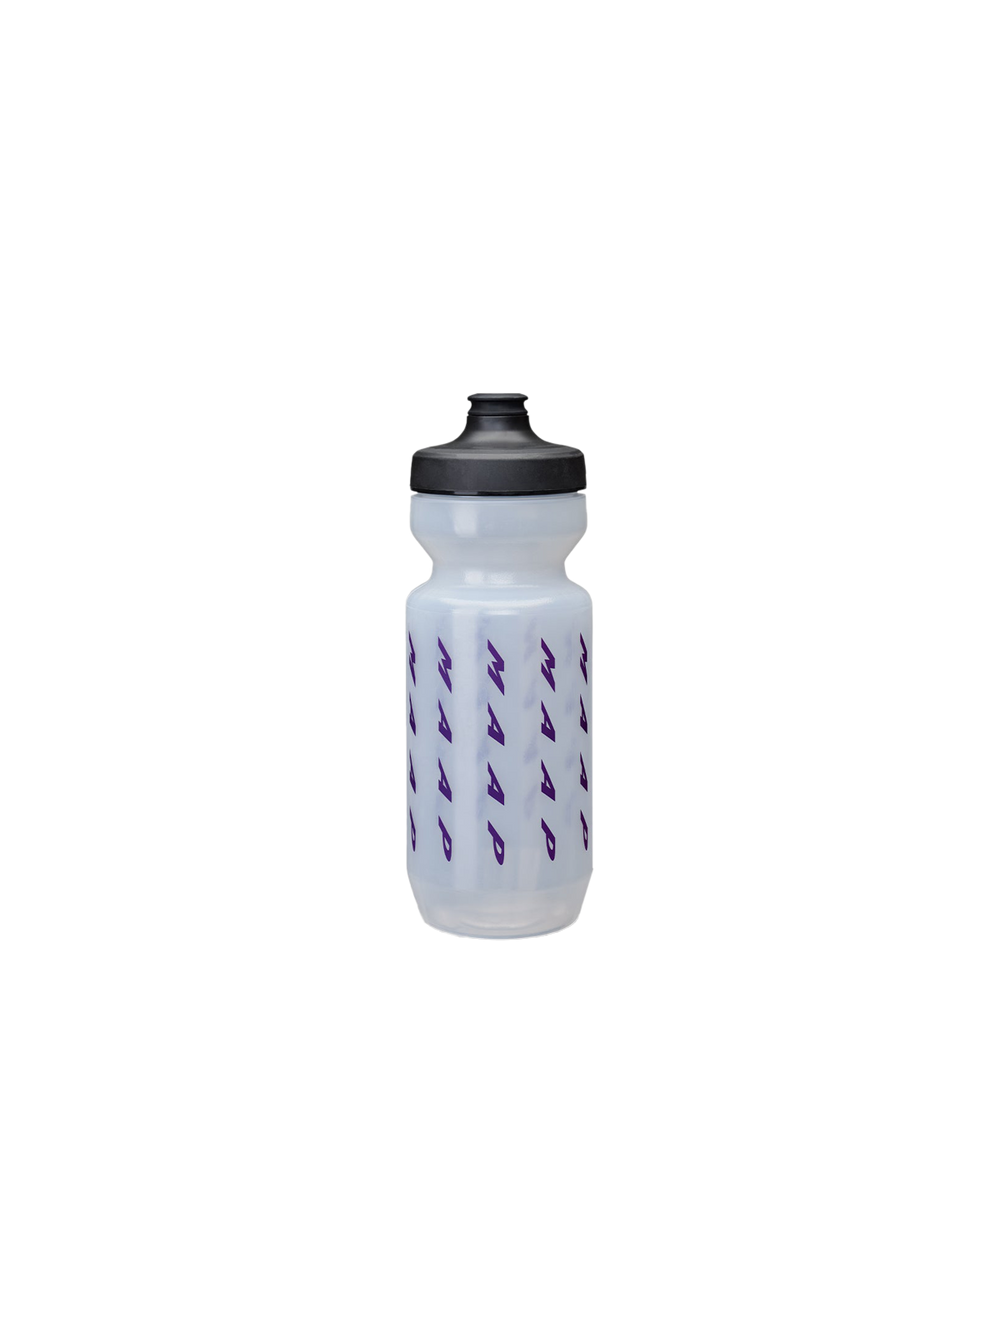 Product Image for Evade Bottle